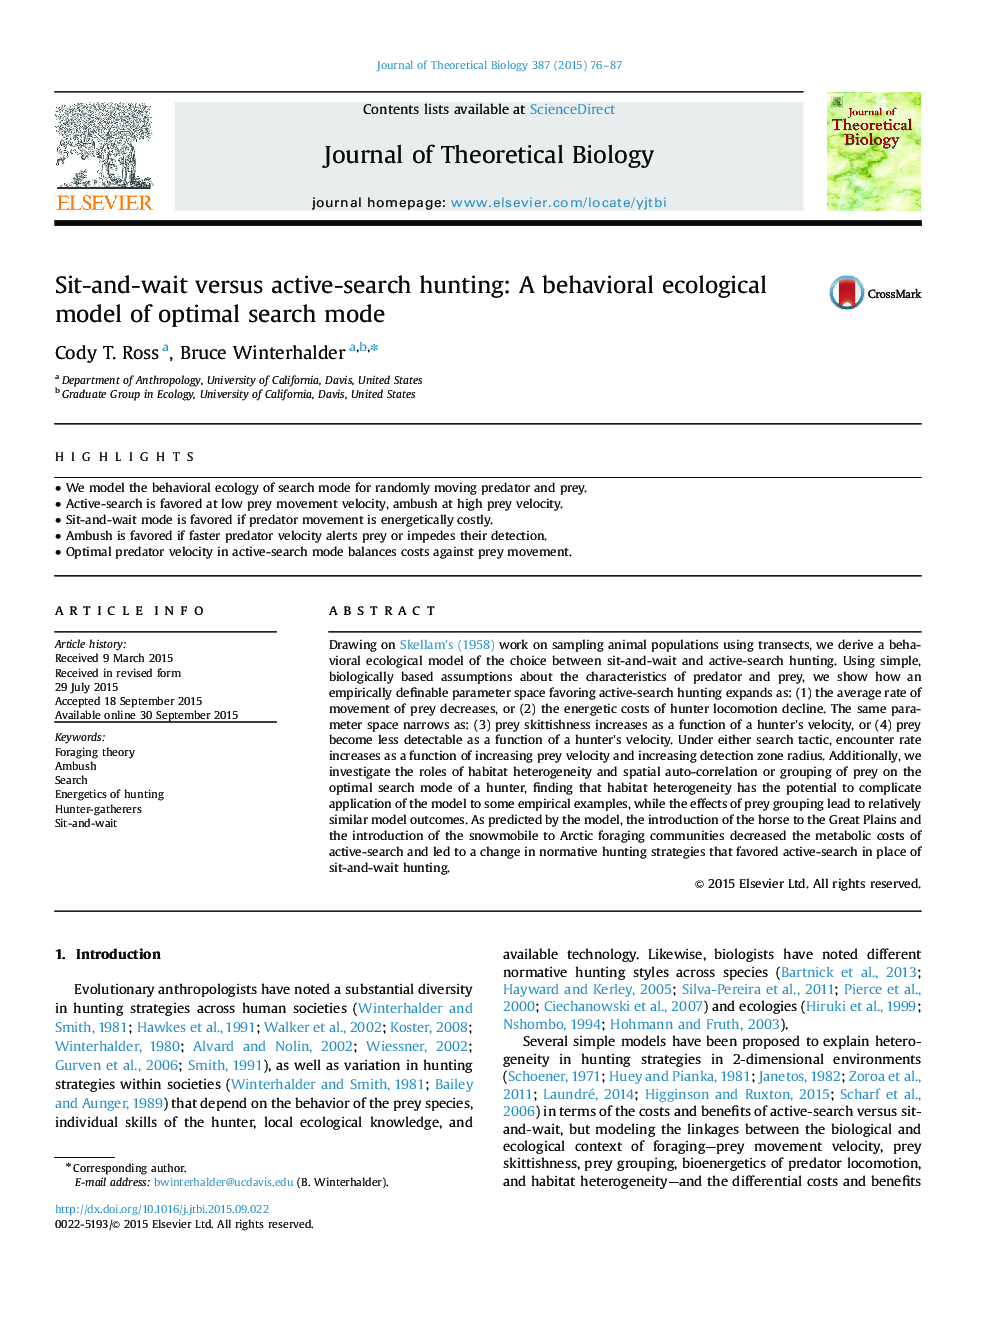 Sit-and-wait versus active-search hunting: A behavioral ecological model of optimal search mode